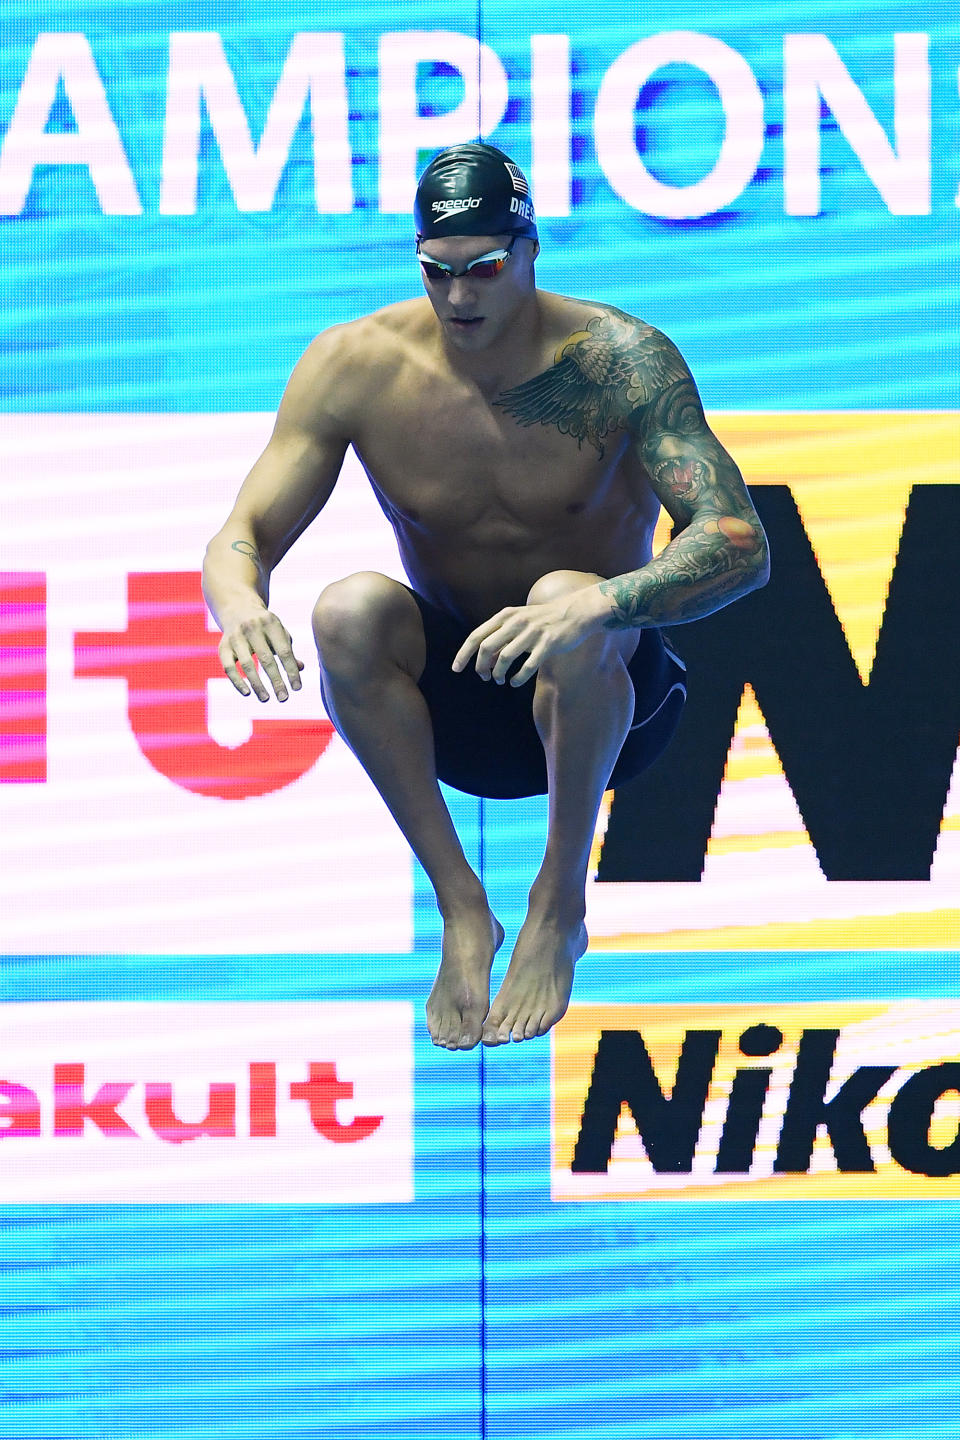 GWANGJU, SOUTH KOREA - JULY 26: Caeleb Dressel of the United States prepares to compete in the Men's 100m Butterfly Semifinal on day six of the Gwangju 2019 FINA World Championships at Nambu International Aquatics Centre on July 26, 2019 in Gwangju, South Korea. (Photo by Quinn Rooney/Getty Images)